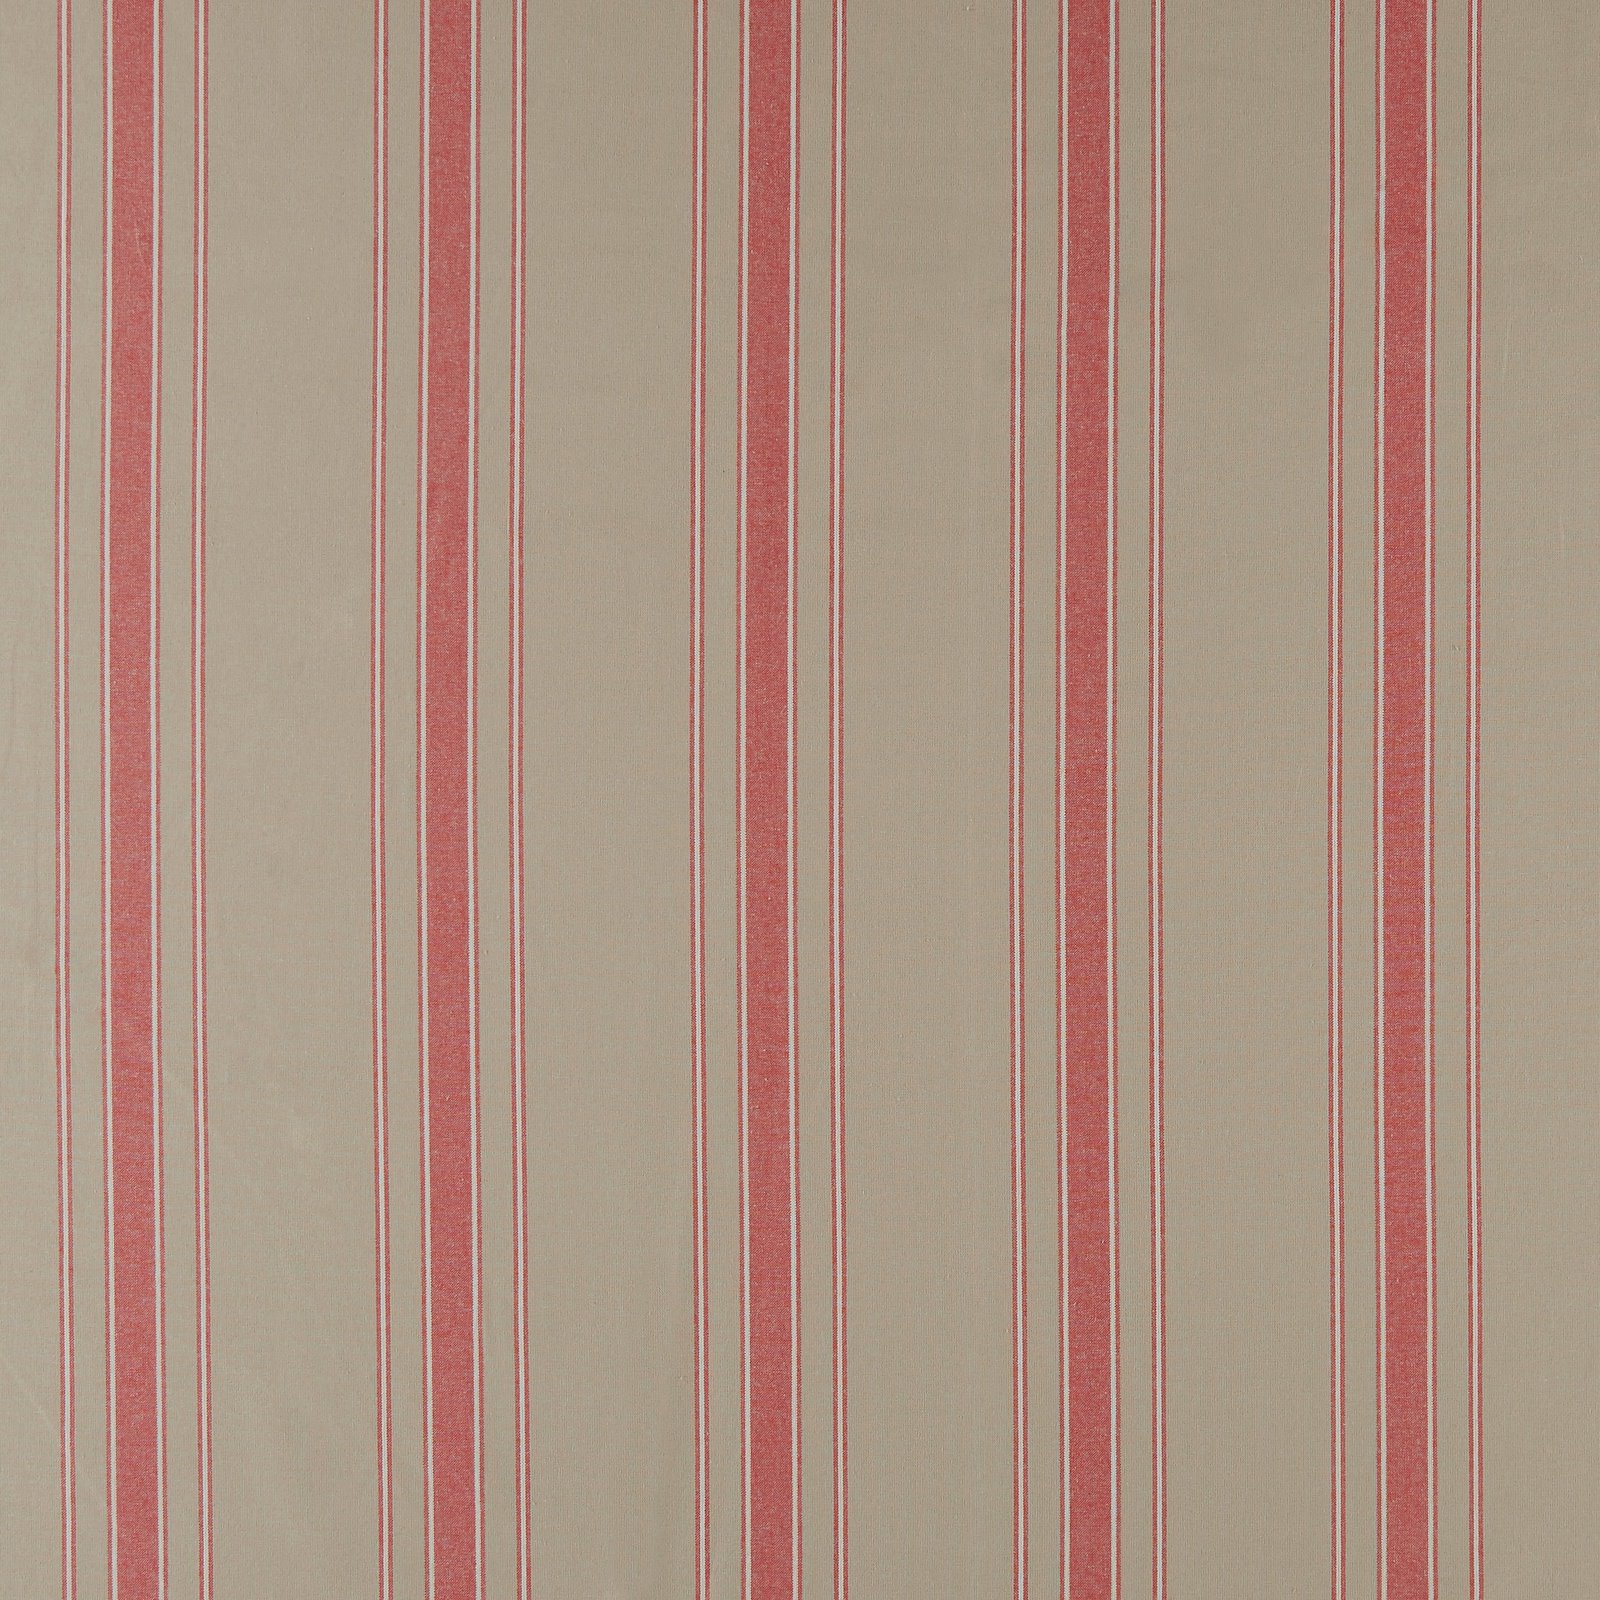 Woven cotton sand/red YD stripe 816310_pack_sp